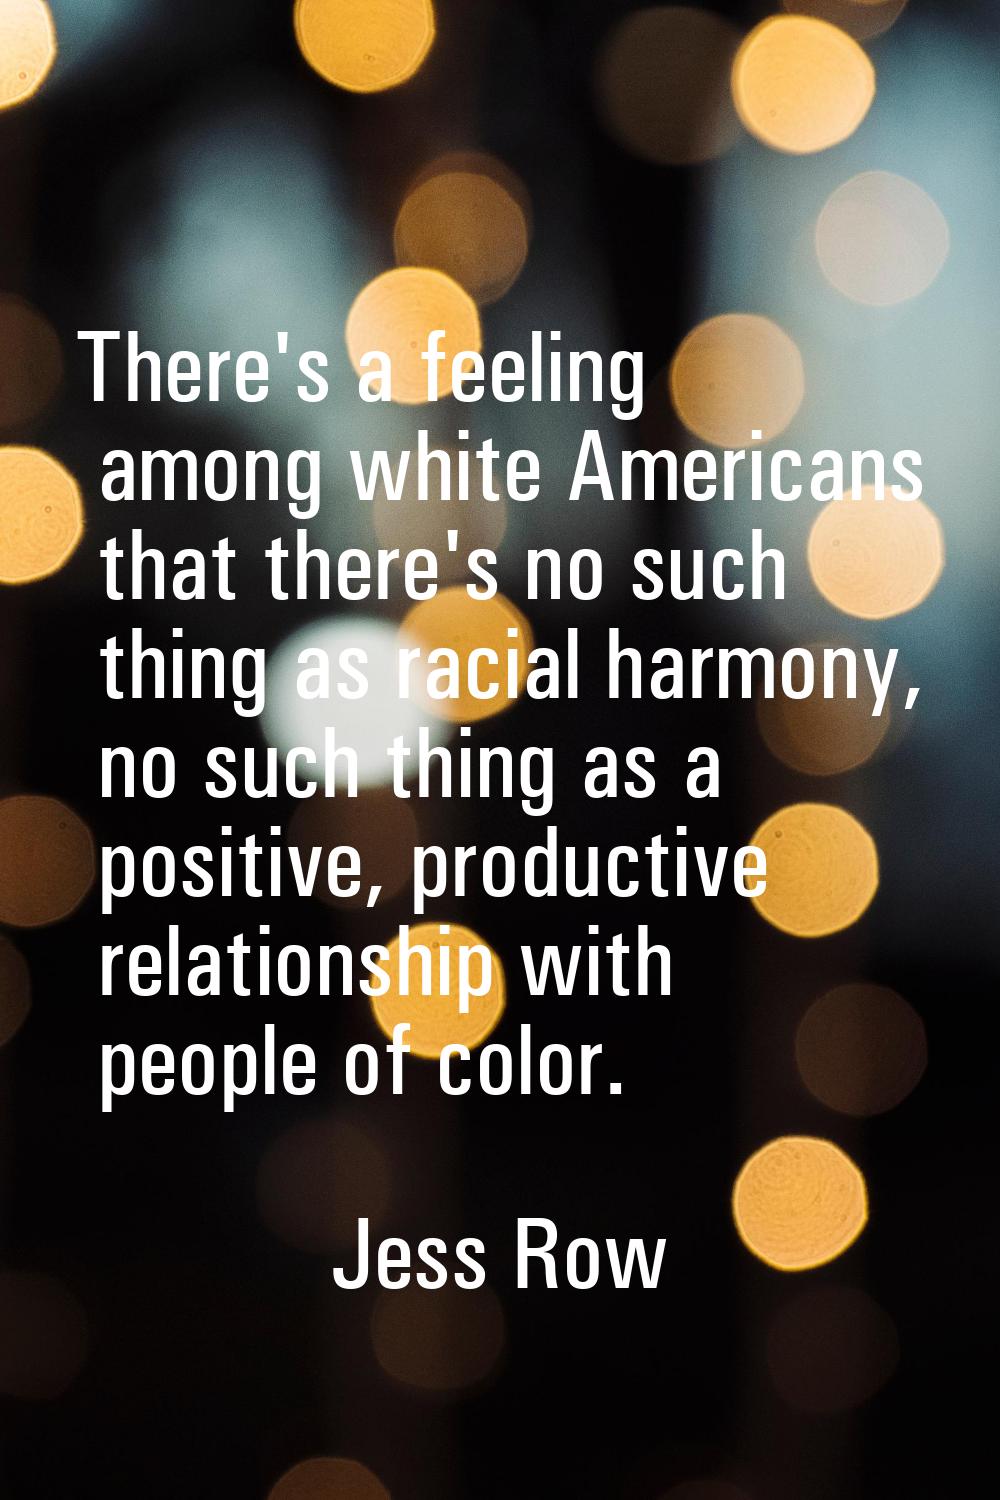 There's a feeling among white Americans that there's no such thing as racial harmony, no such thing